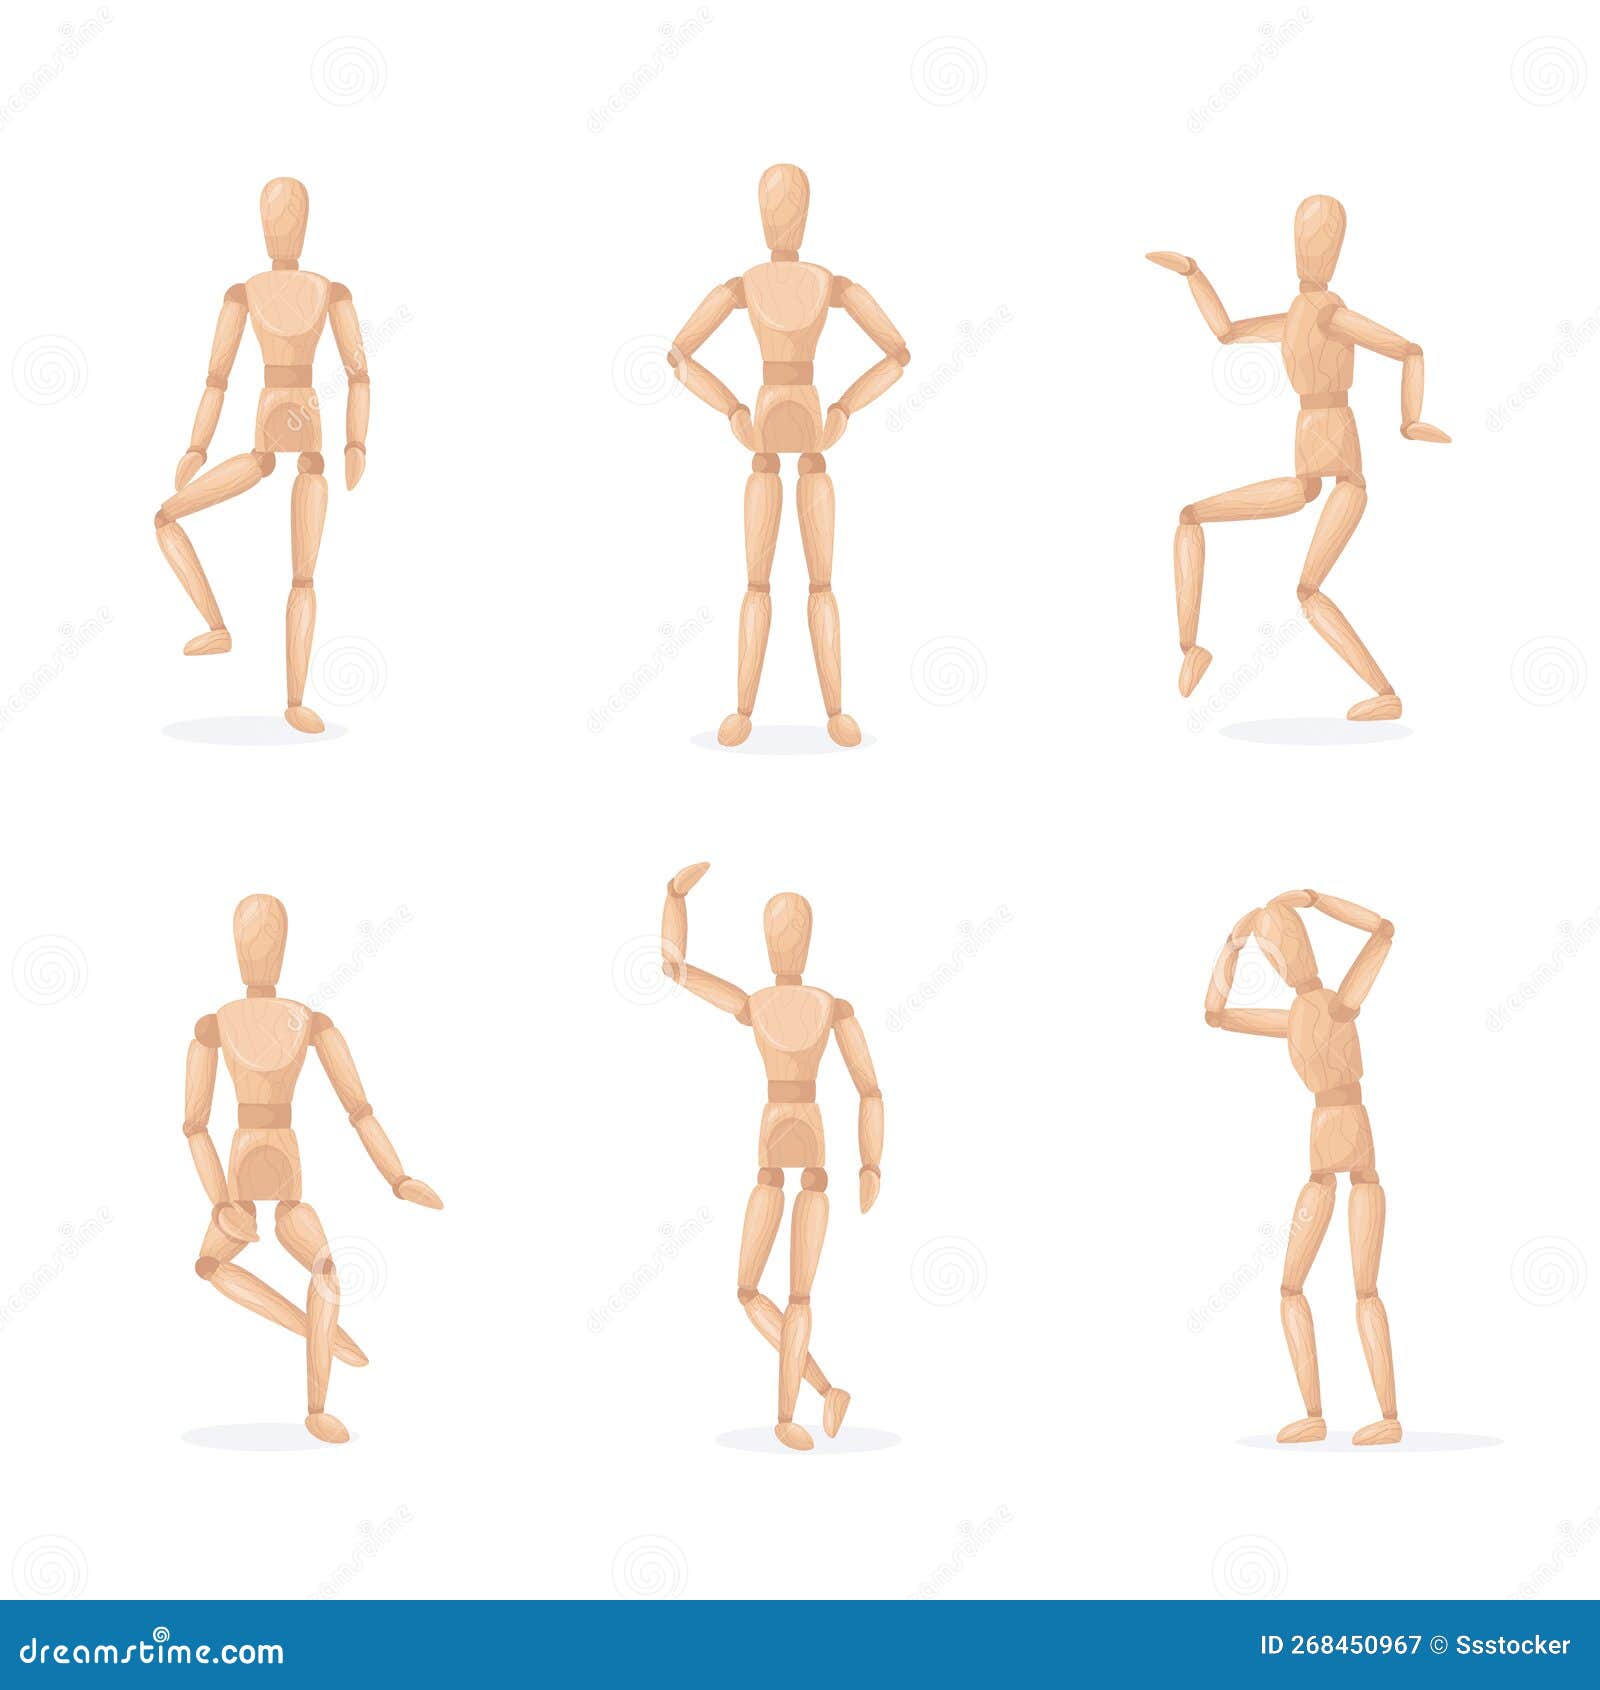 Male Wooden Mannequin Martial Arts Pose Stock Photo 1394236484 |  Shutterstock